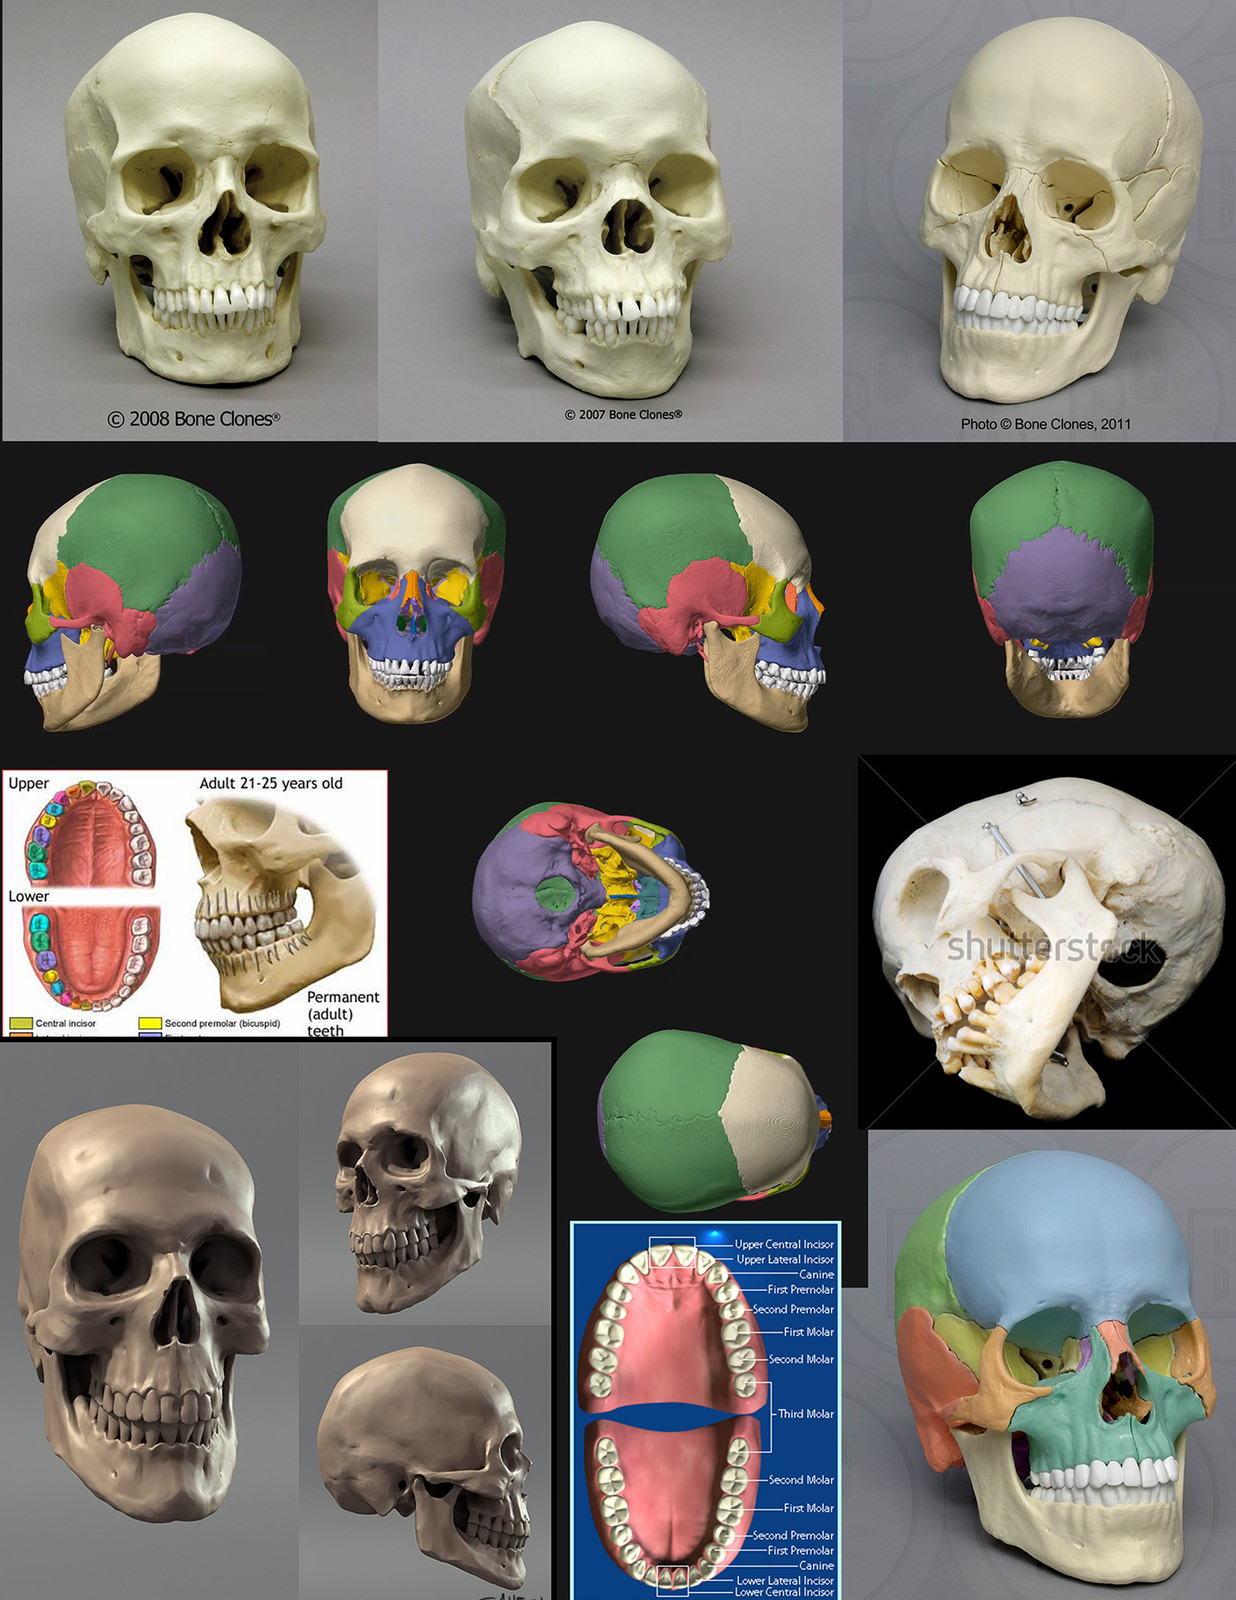 This is the refs collection  I used.  Images from boneclones.com, medical websites, and one digital skull from an artist that I unfortunately can't find anymore and would like to credit for the image here.